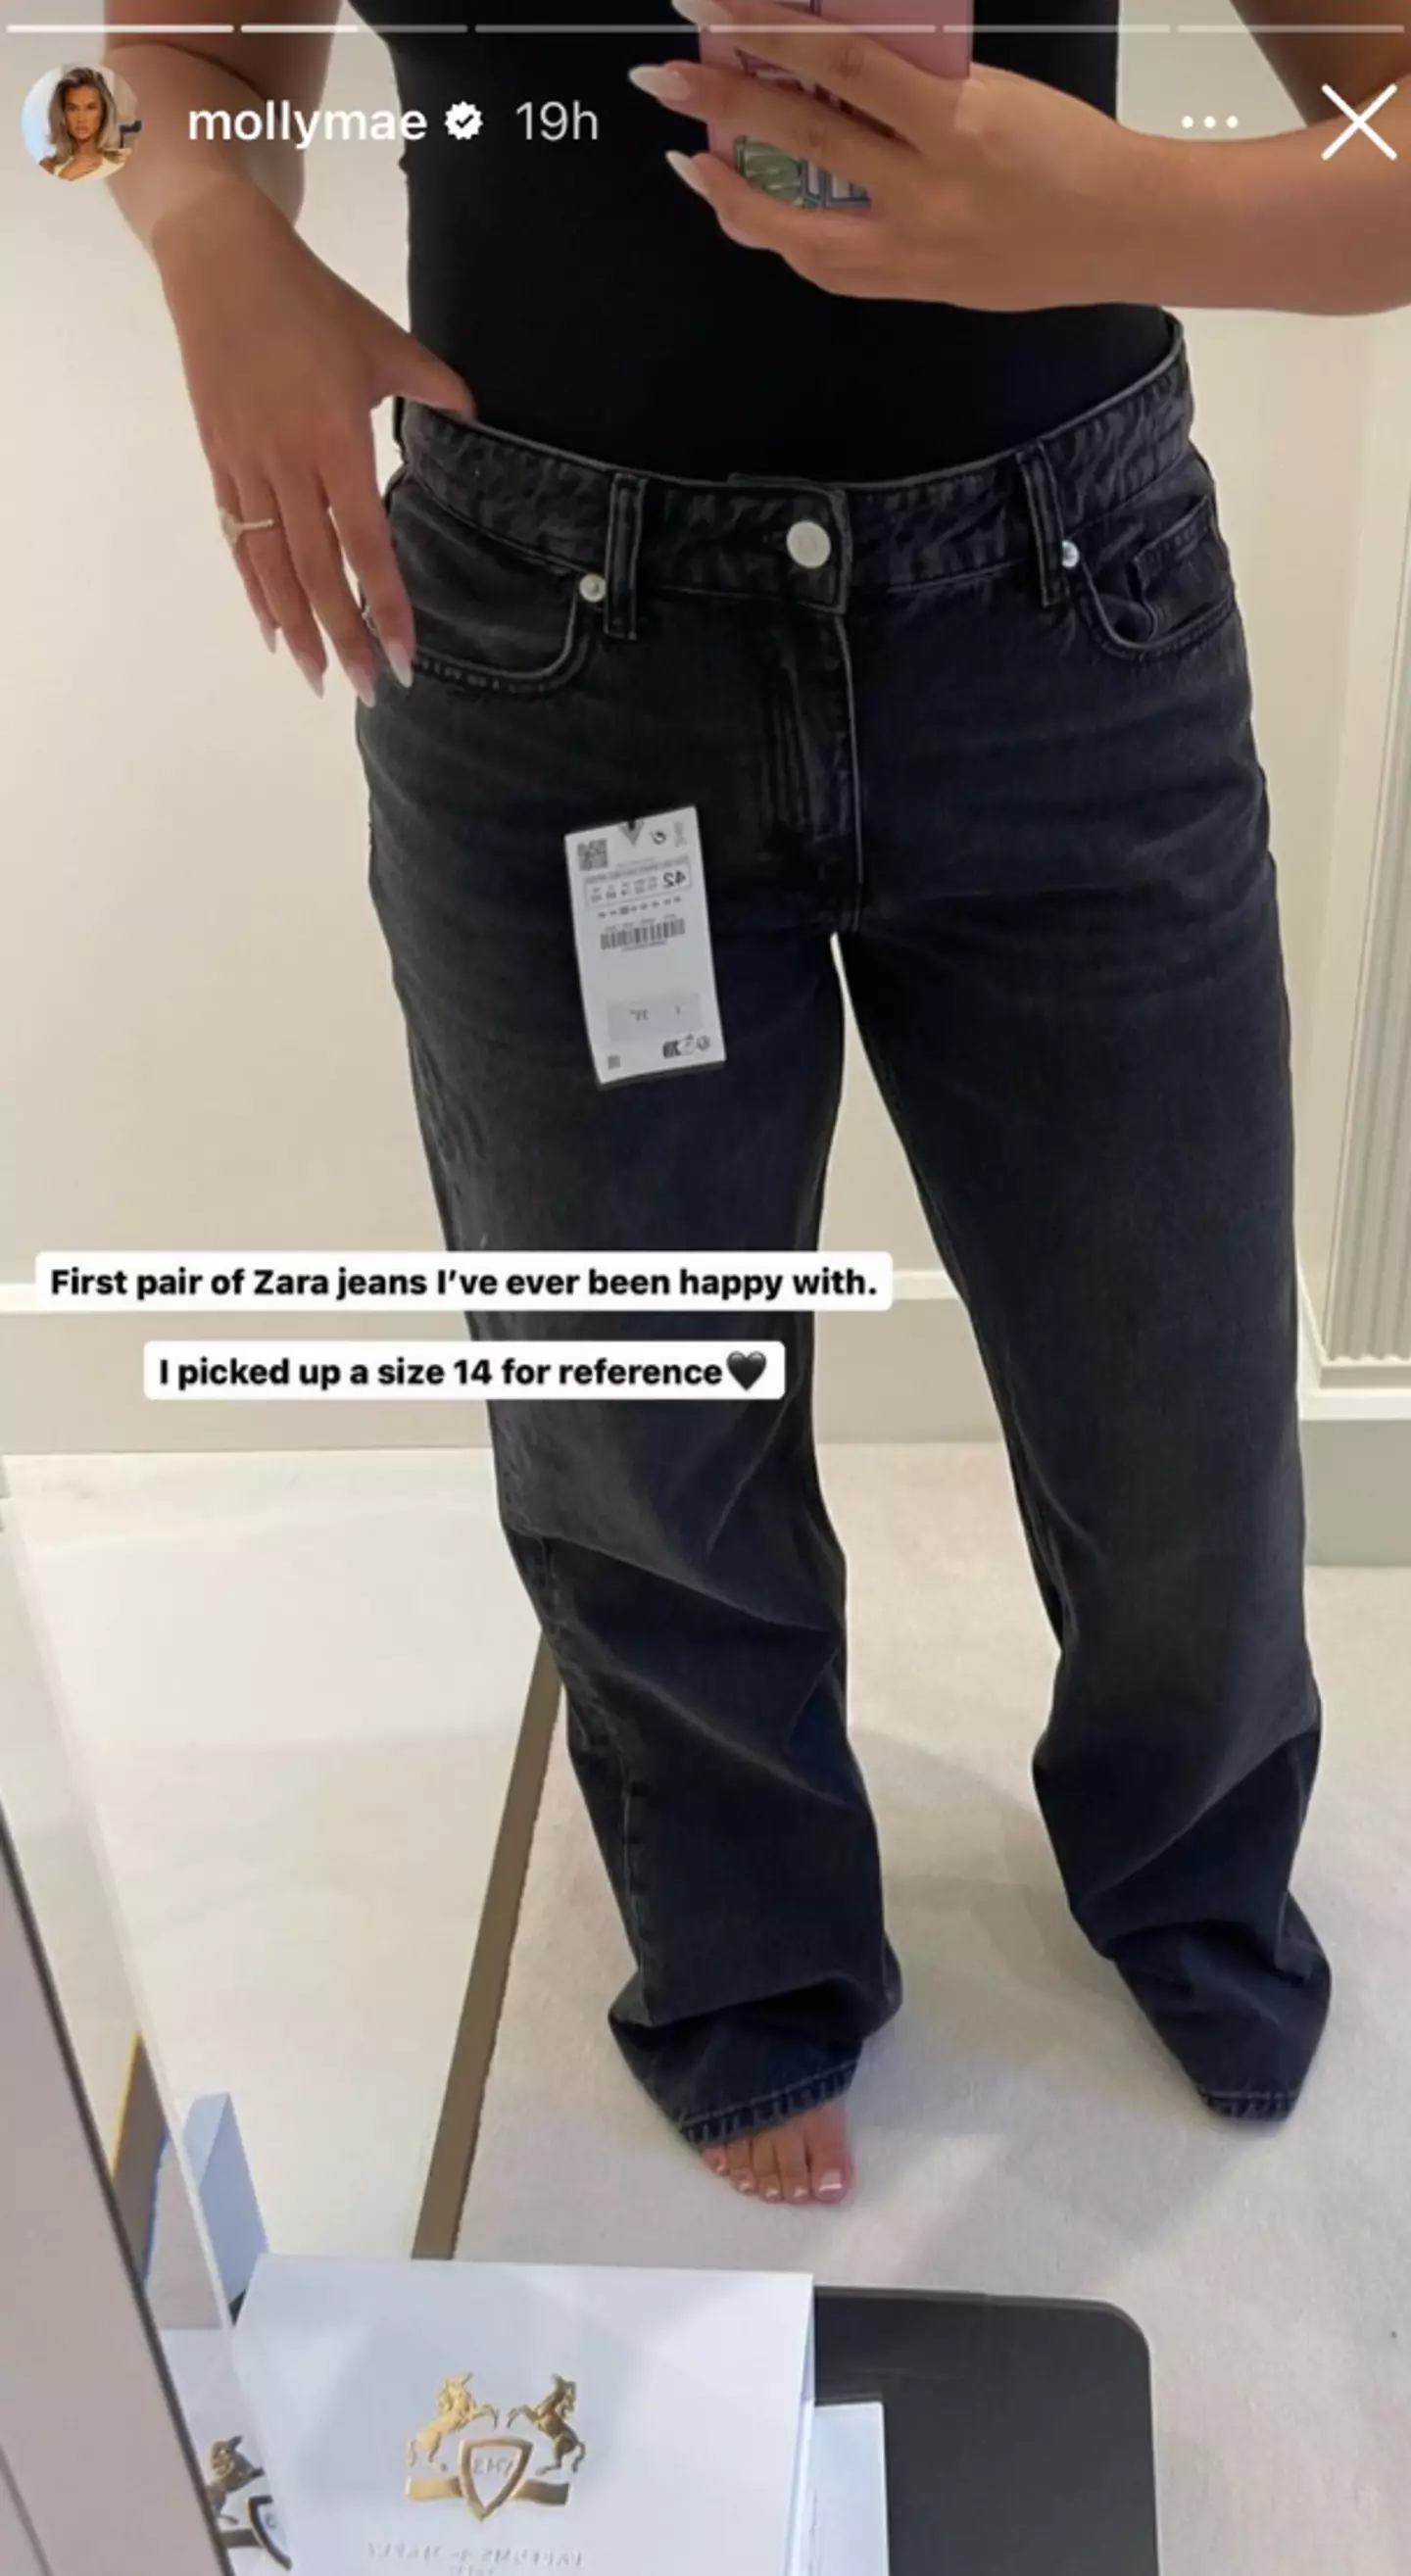 Molly-Mae's size 14 jeans has sparked a debate about the issues surrounding high street sizing.